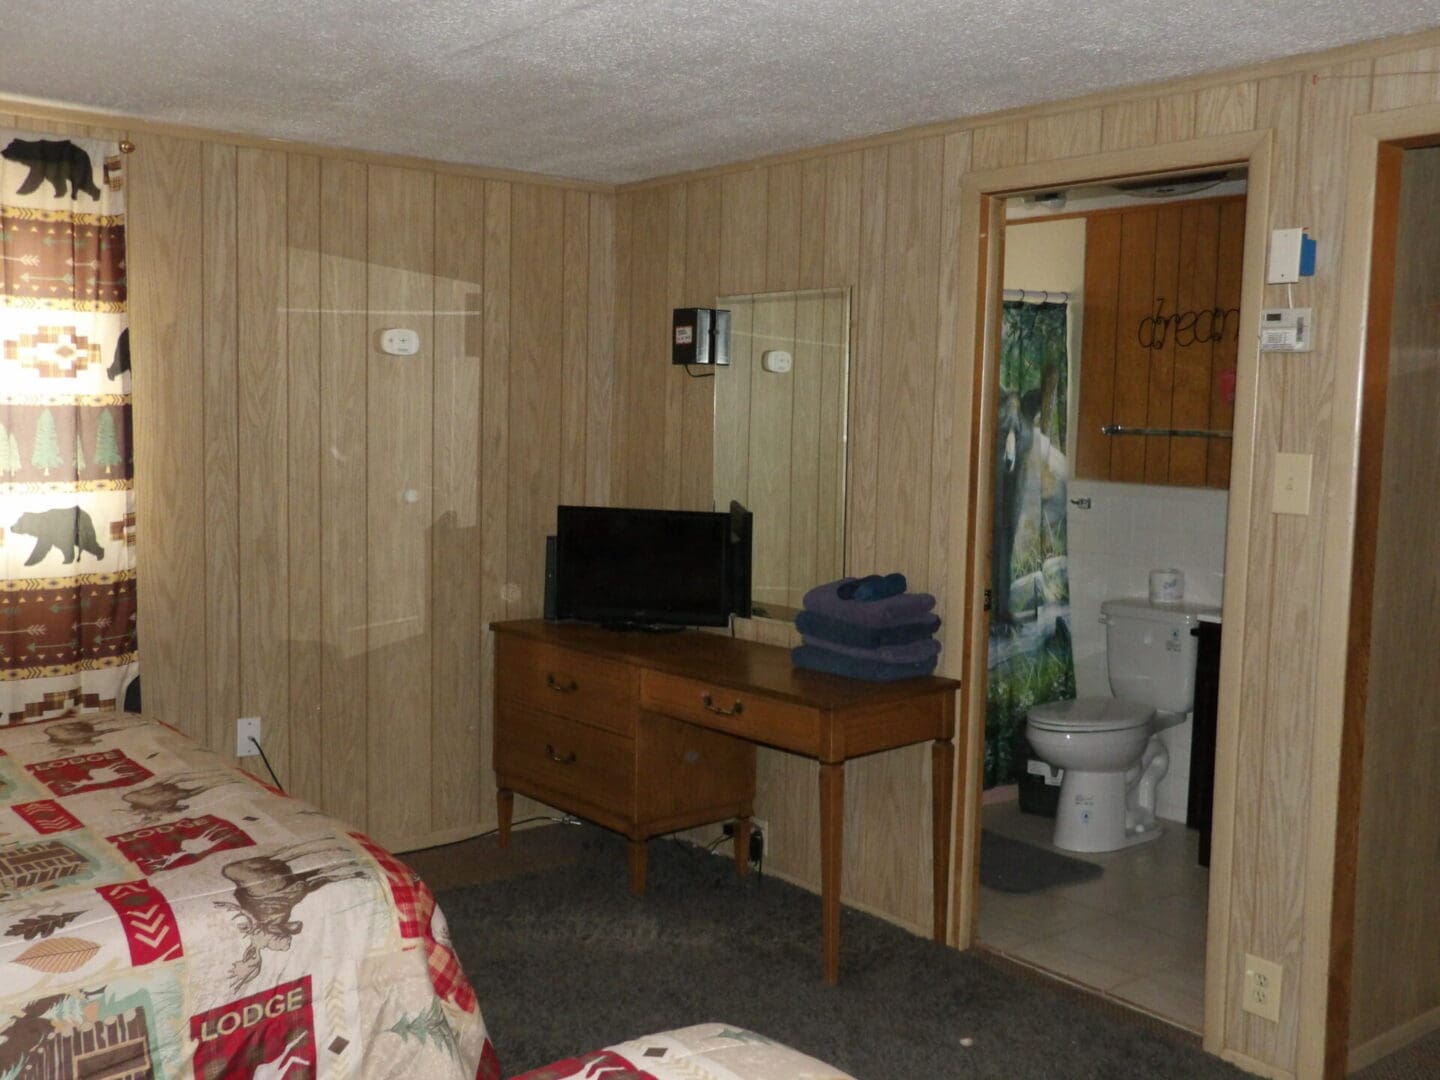 A room with a bed, desk and toilet in it.